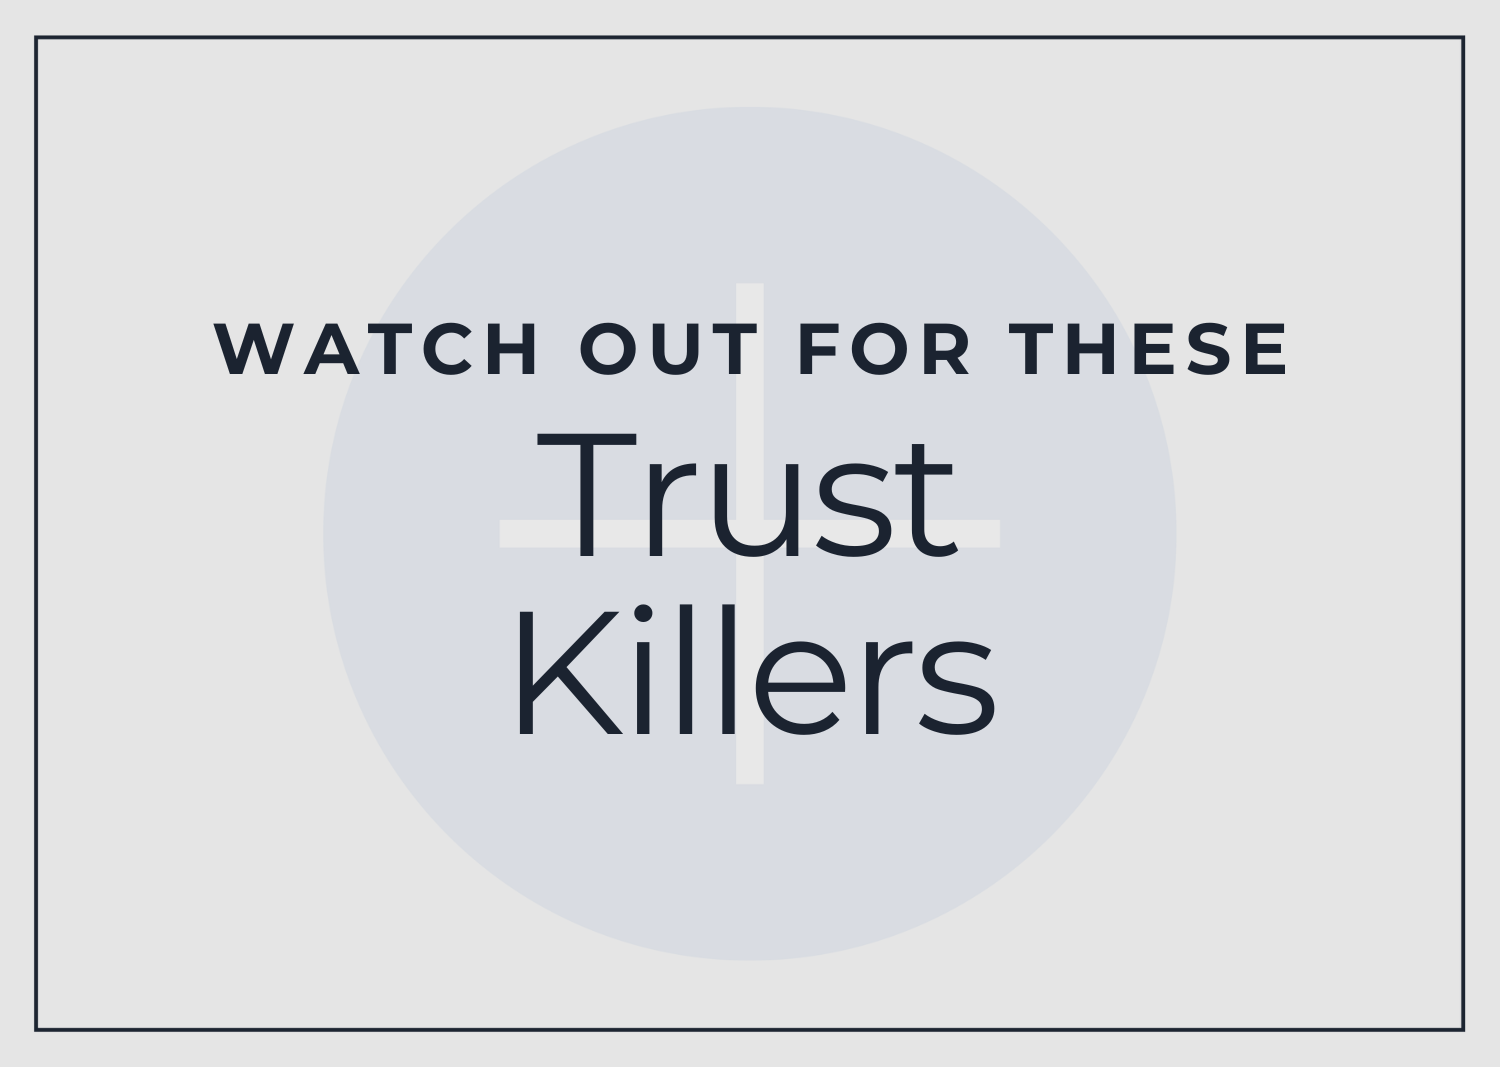 Watch out for these trust killers